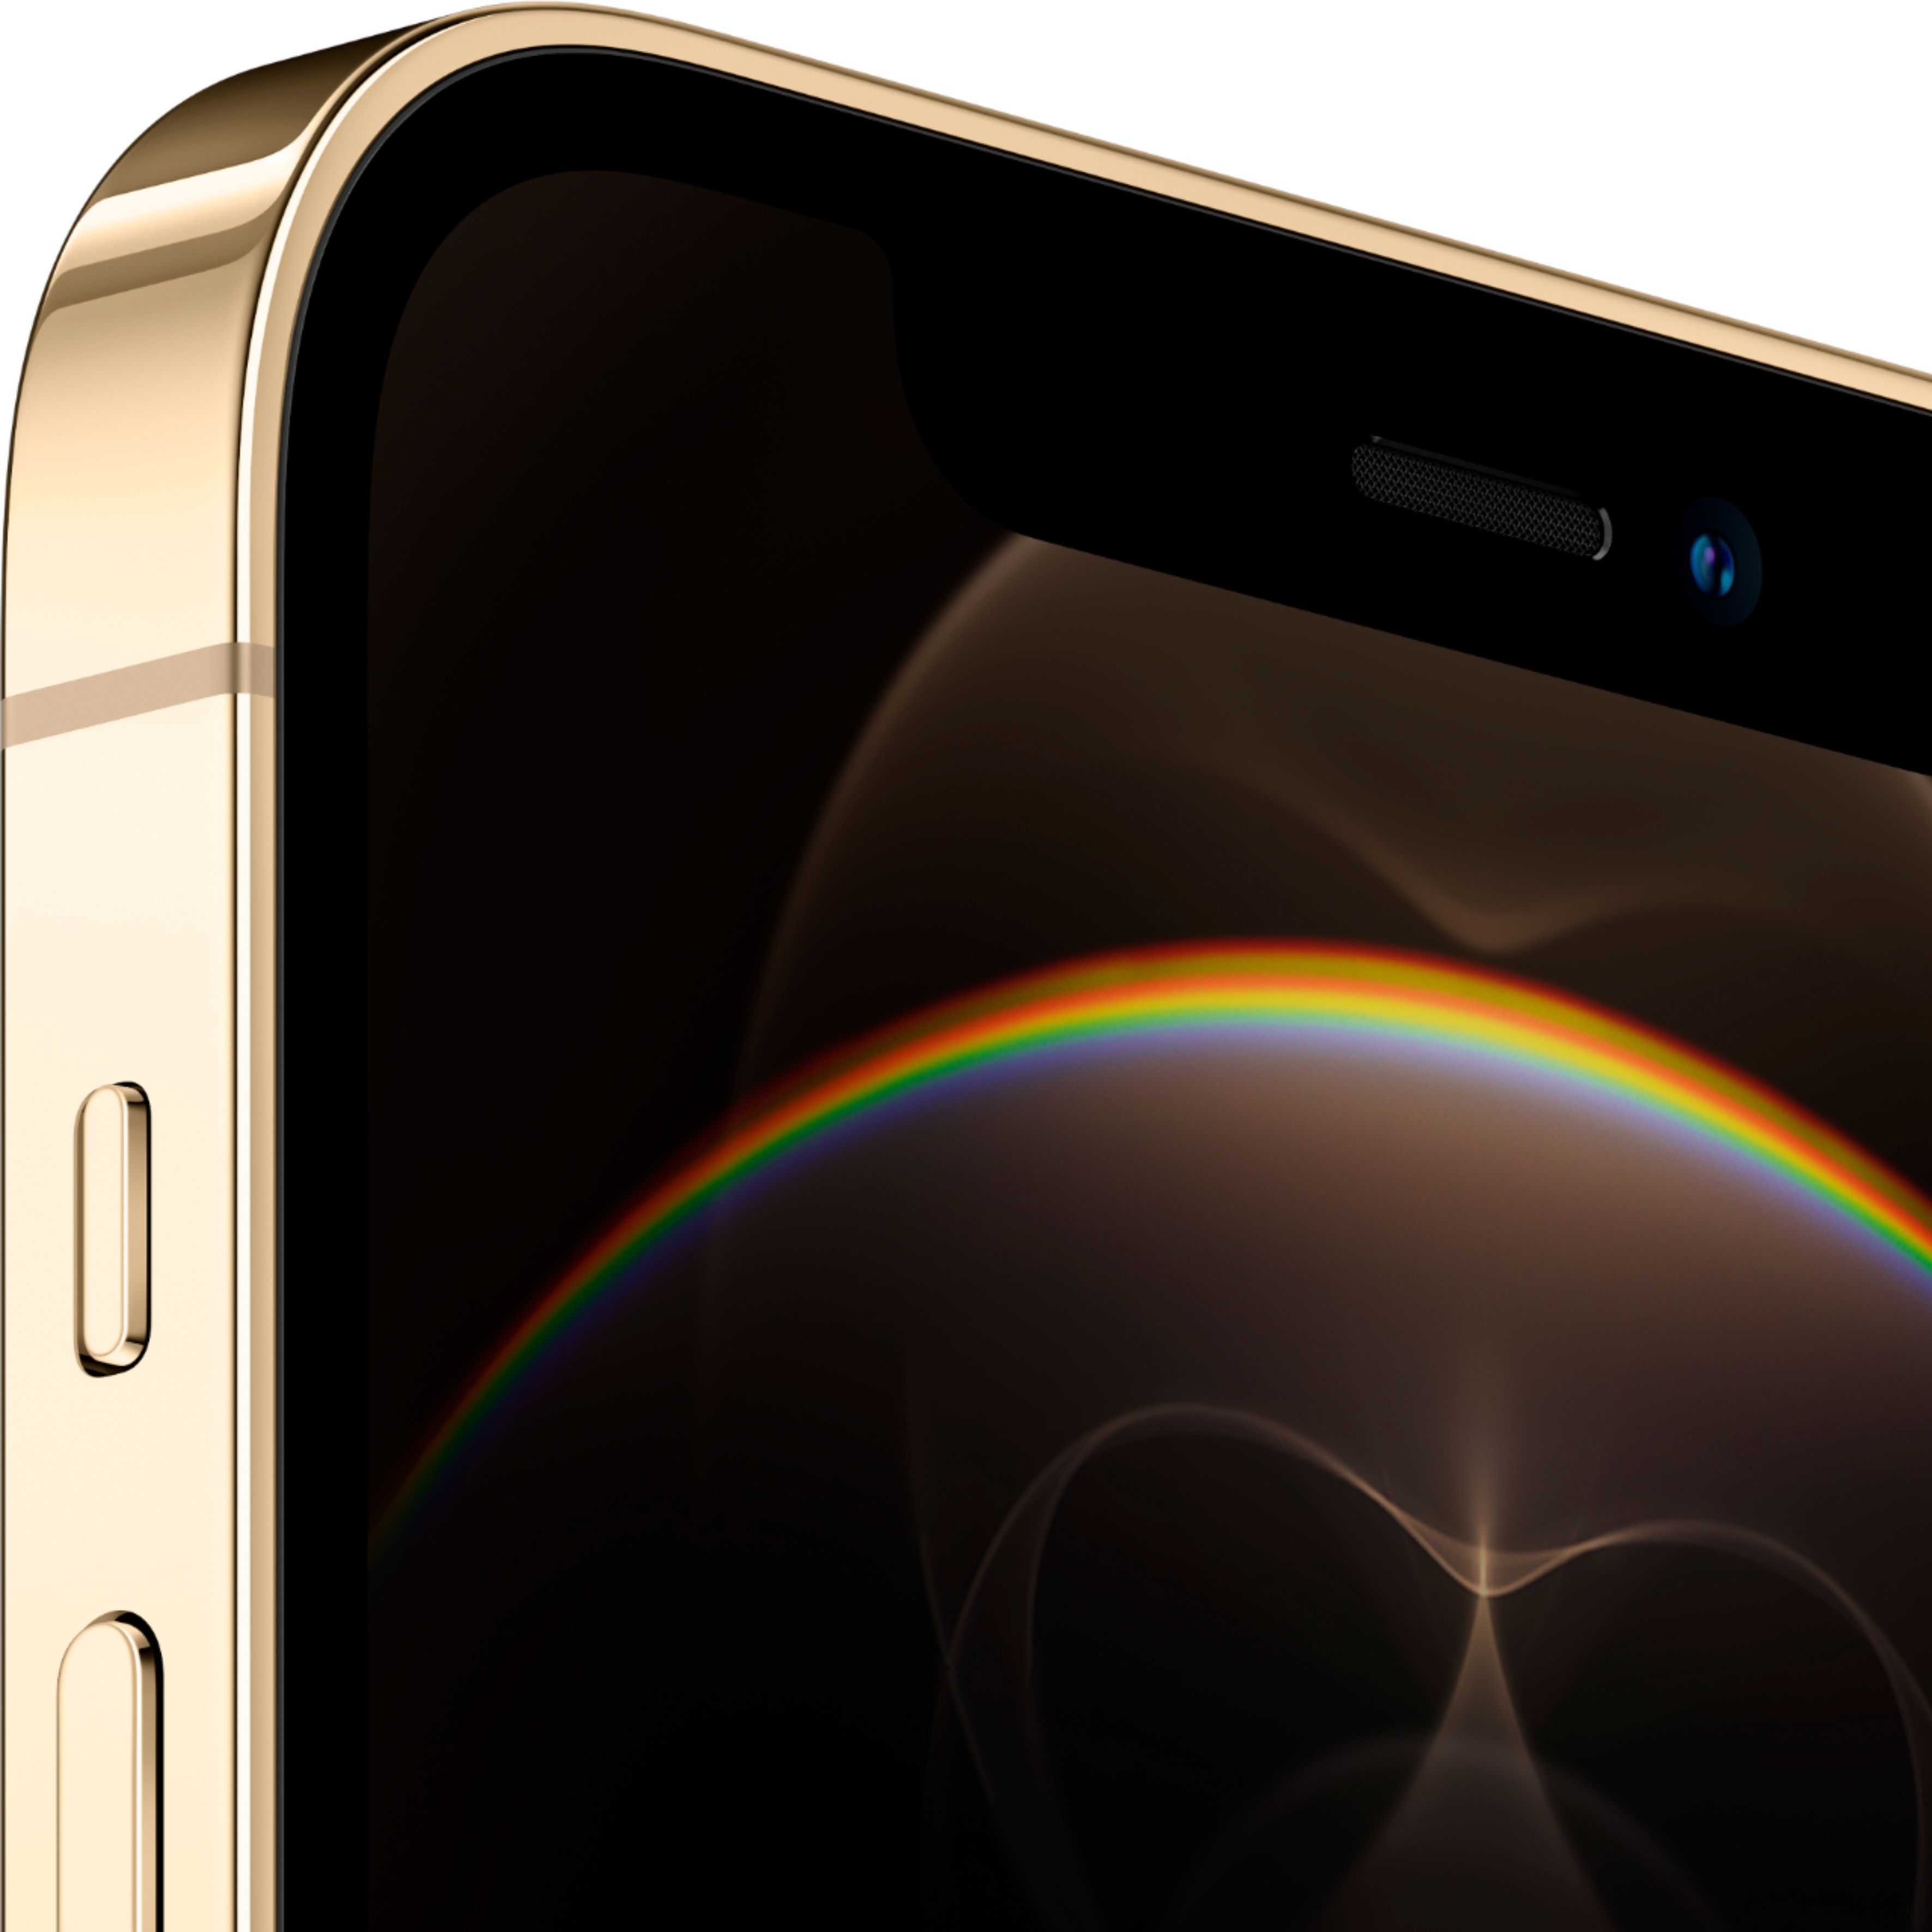 Apple Iphone 12 Pro 5g 128gb Gold At T Mglq3ll A Best Buy